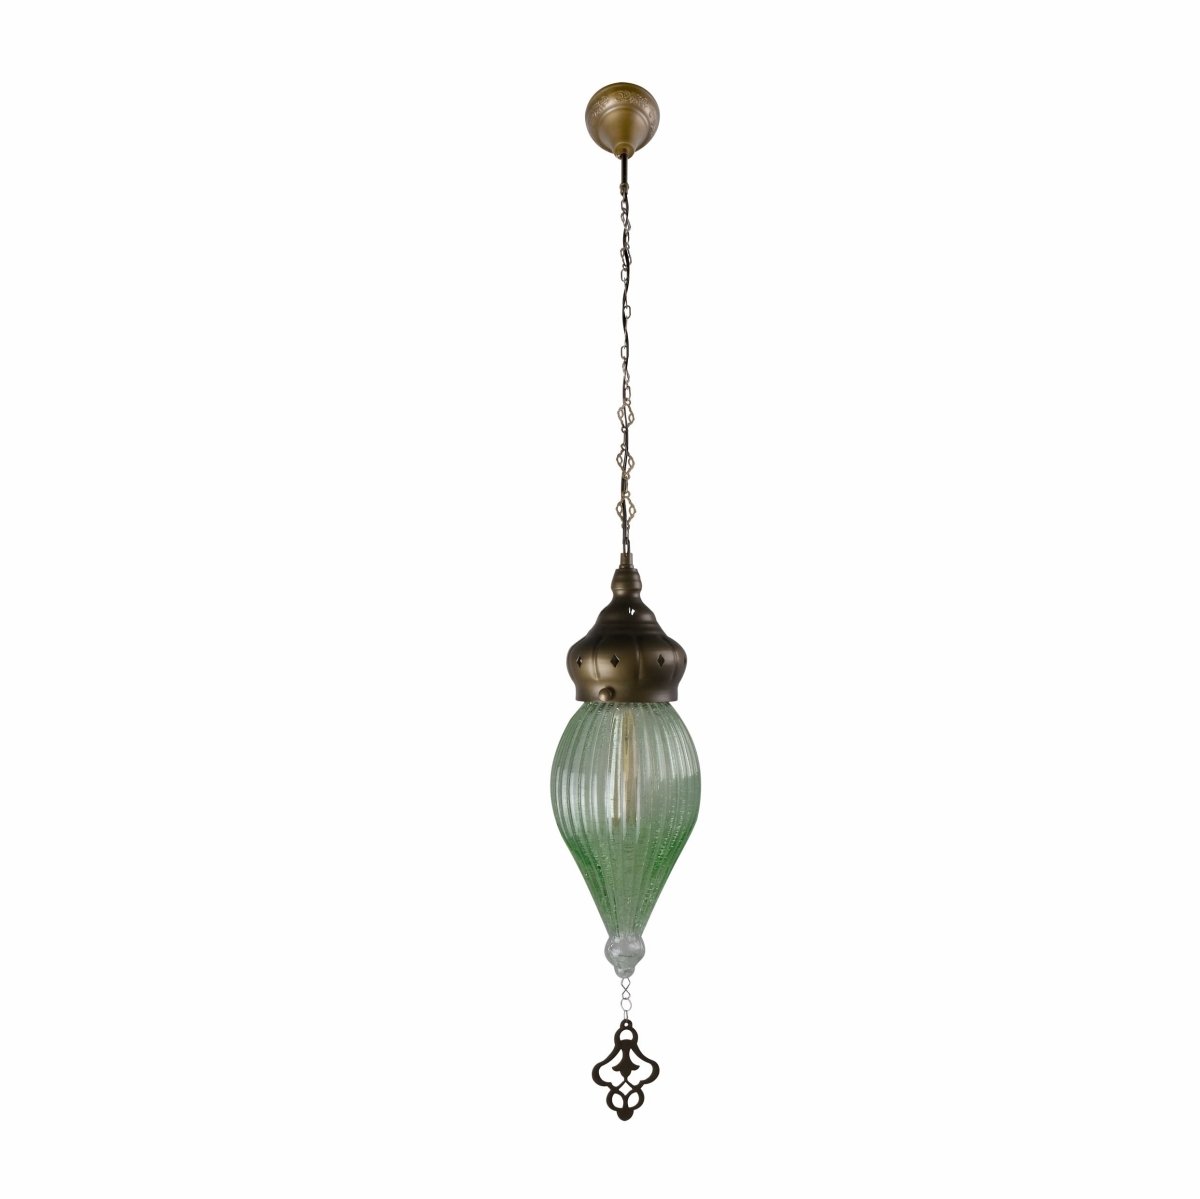 Main image of Moroccan Style Antique Brass and Green Glass Pendant Light E27 | TEKLED 158-195580